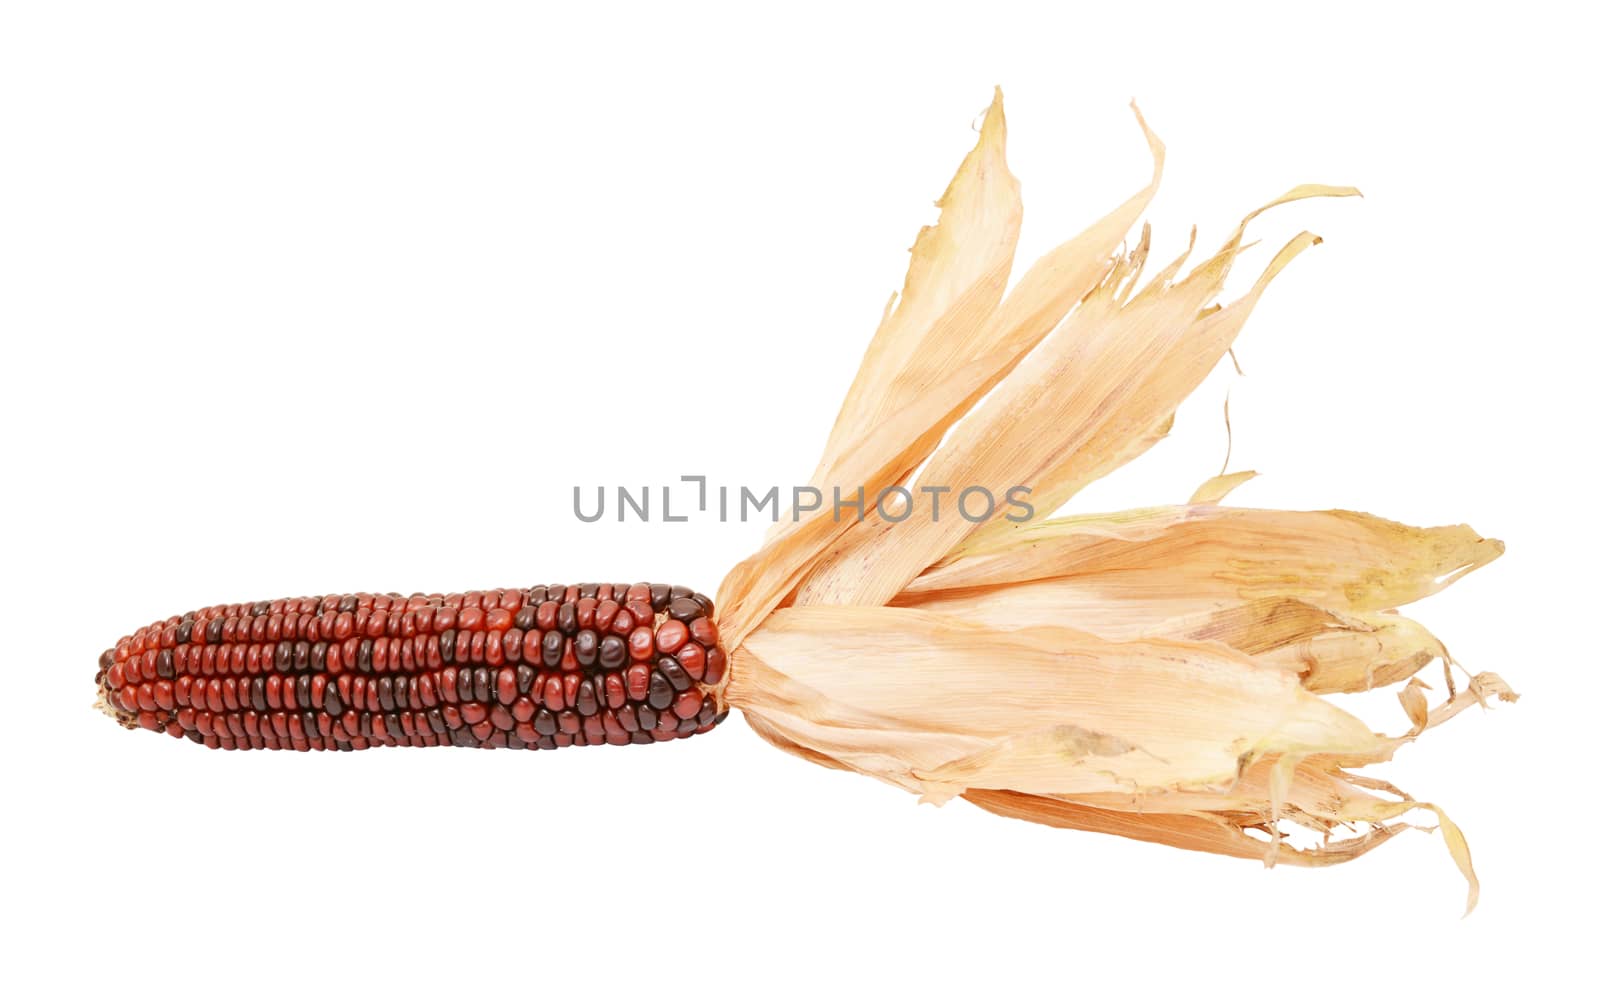 Deep red and brown Indian corn with papery dried husks drawn back from the cob, on a white background